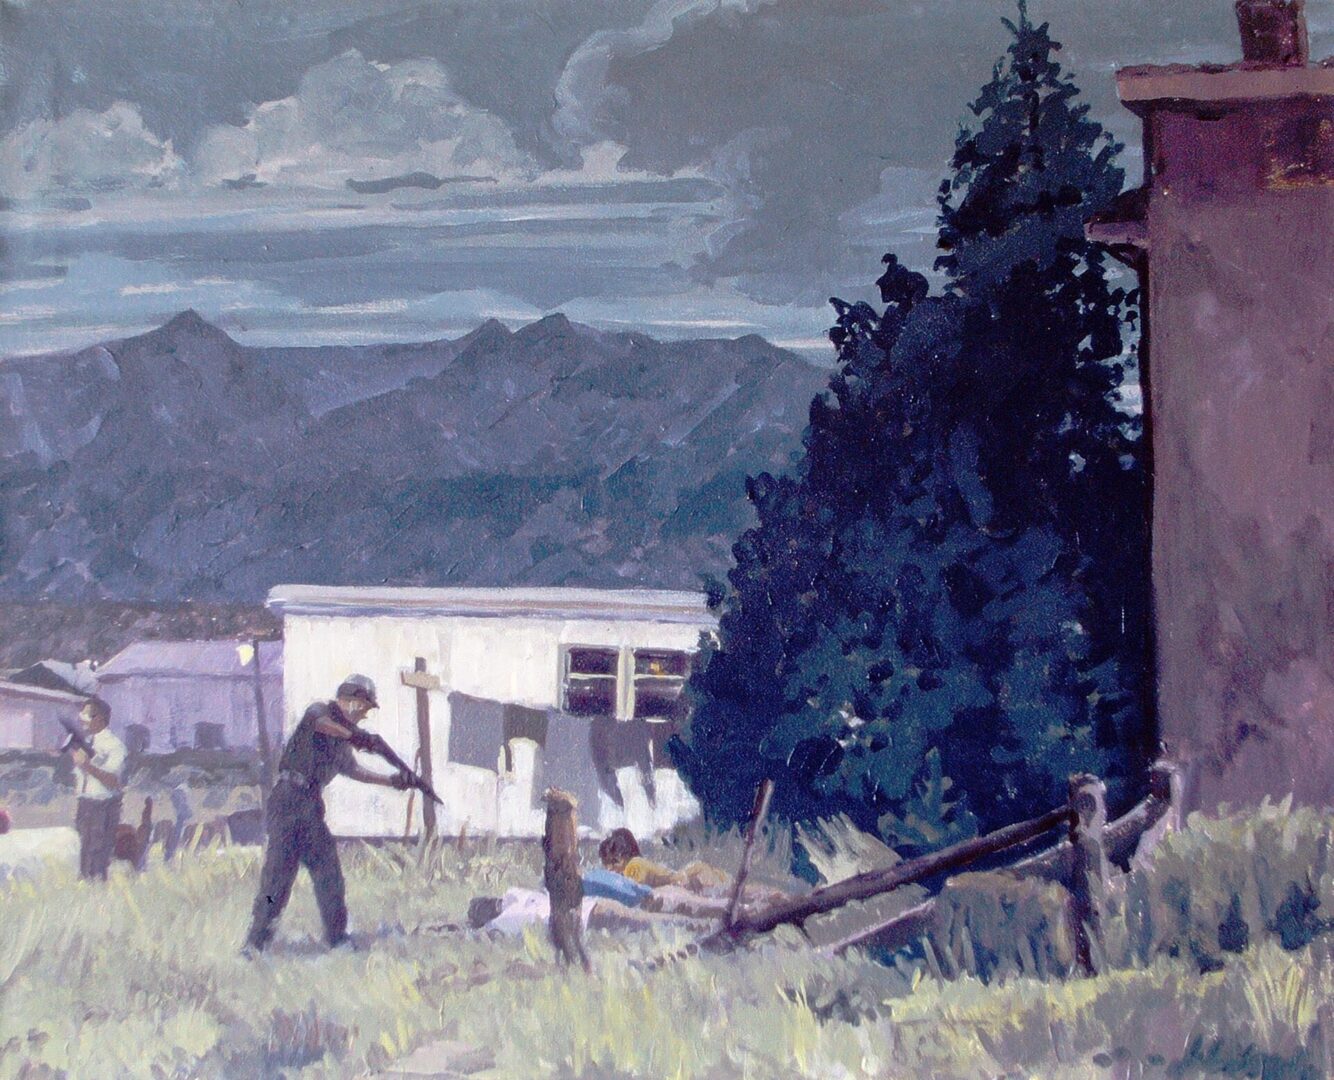 EXECUTION<br>
1986<br>
24" x 30"
